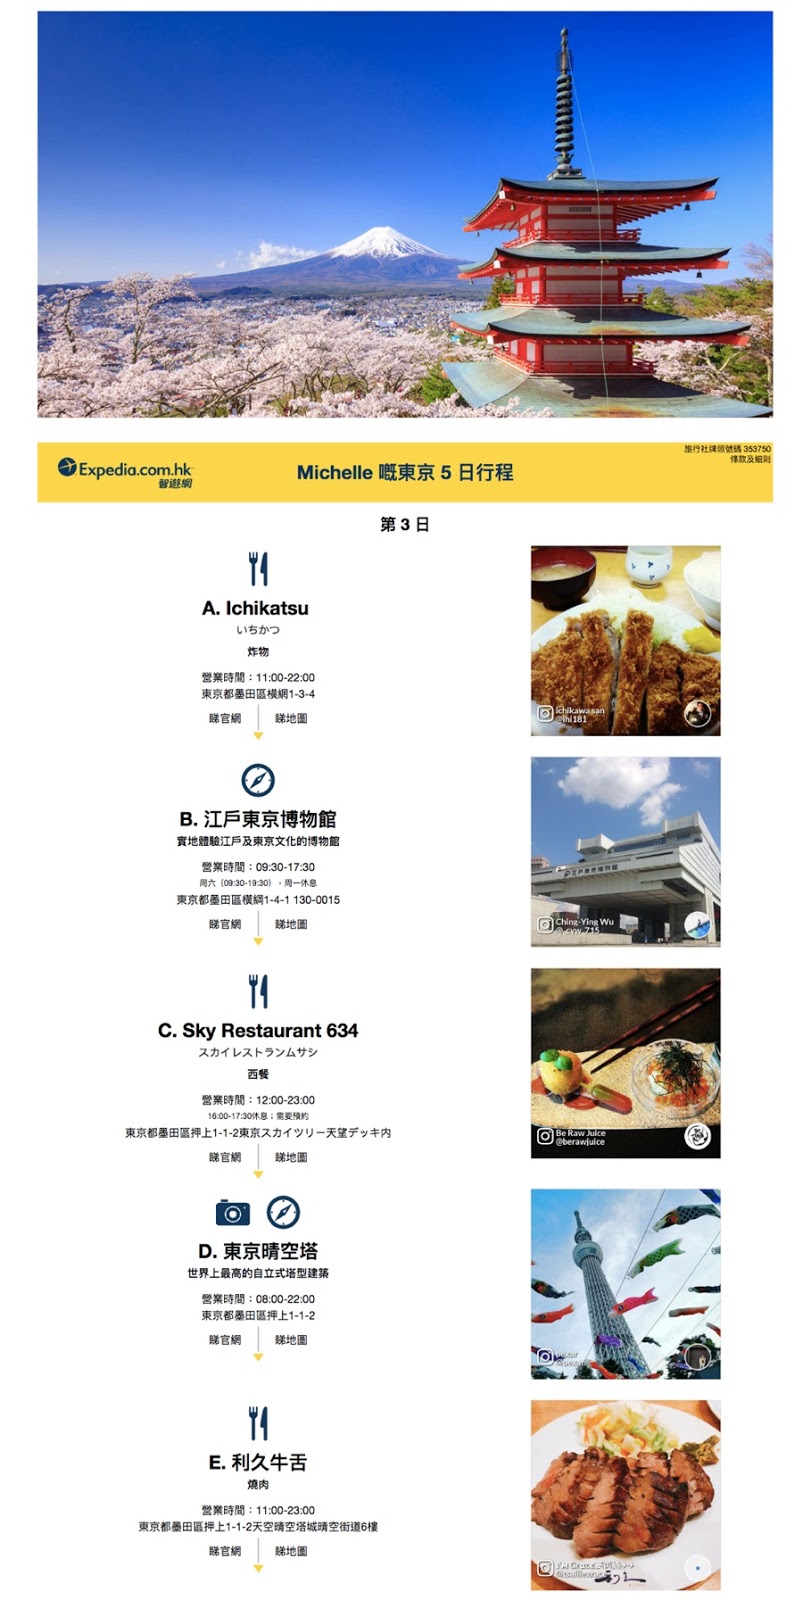 Expedia uses user-generated content in their emails to encourage travel.